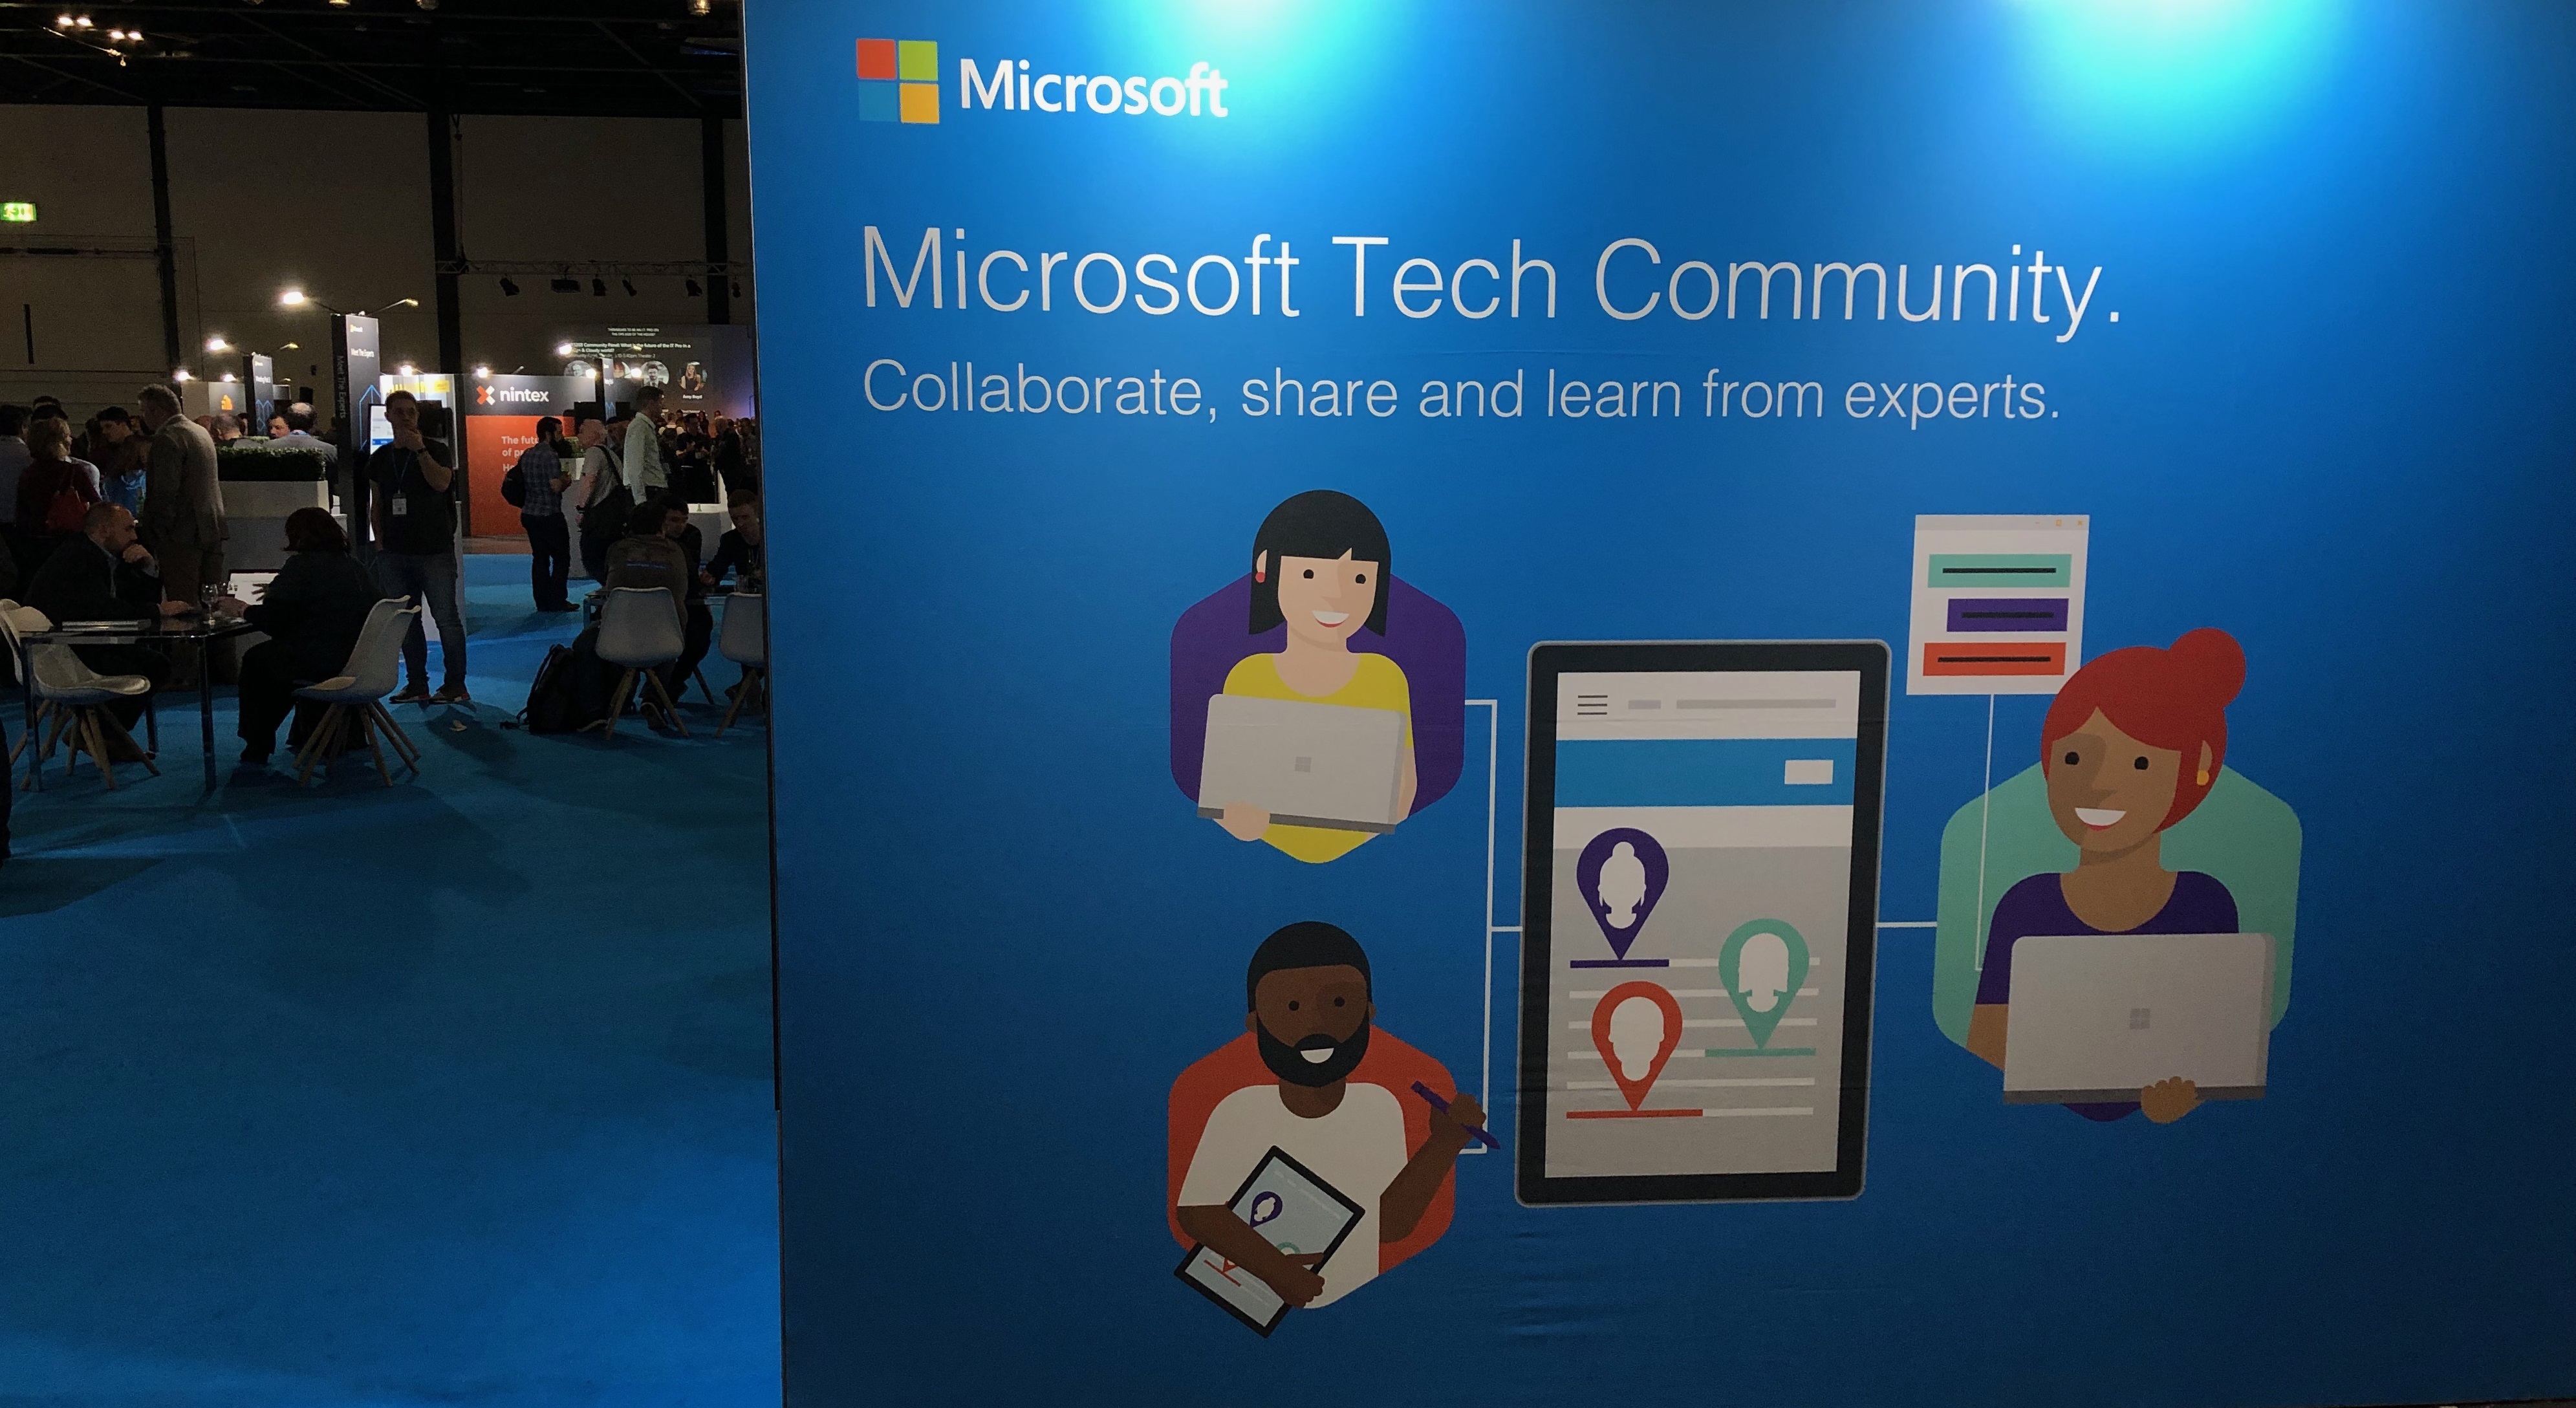 The main Microsoft stand at the ExCeL